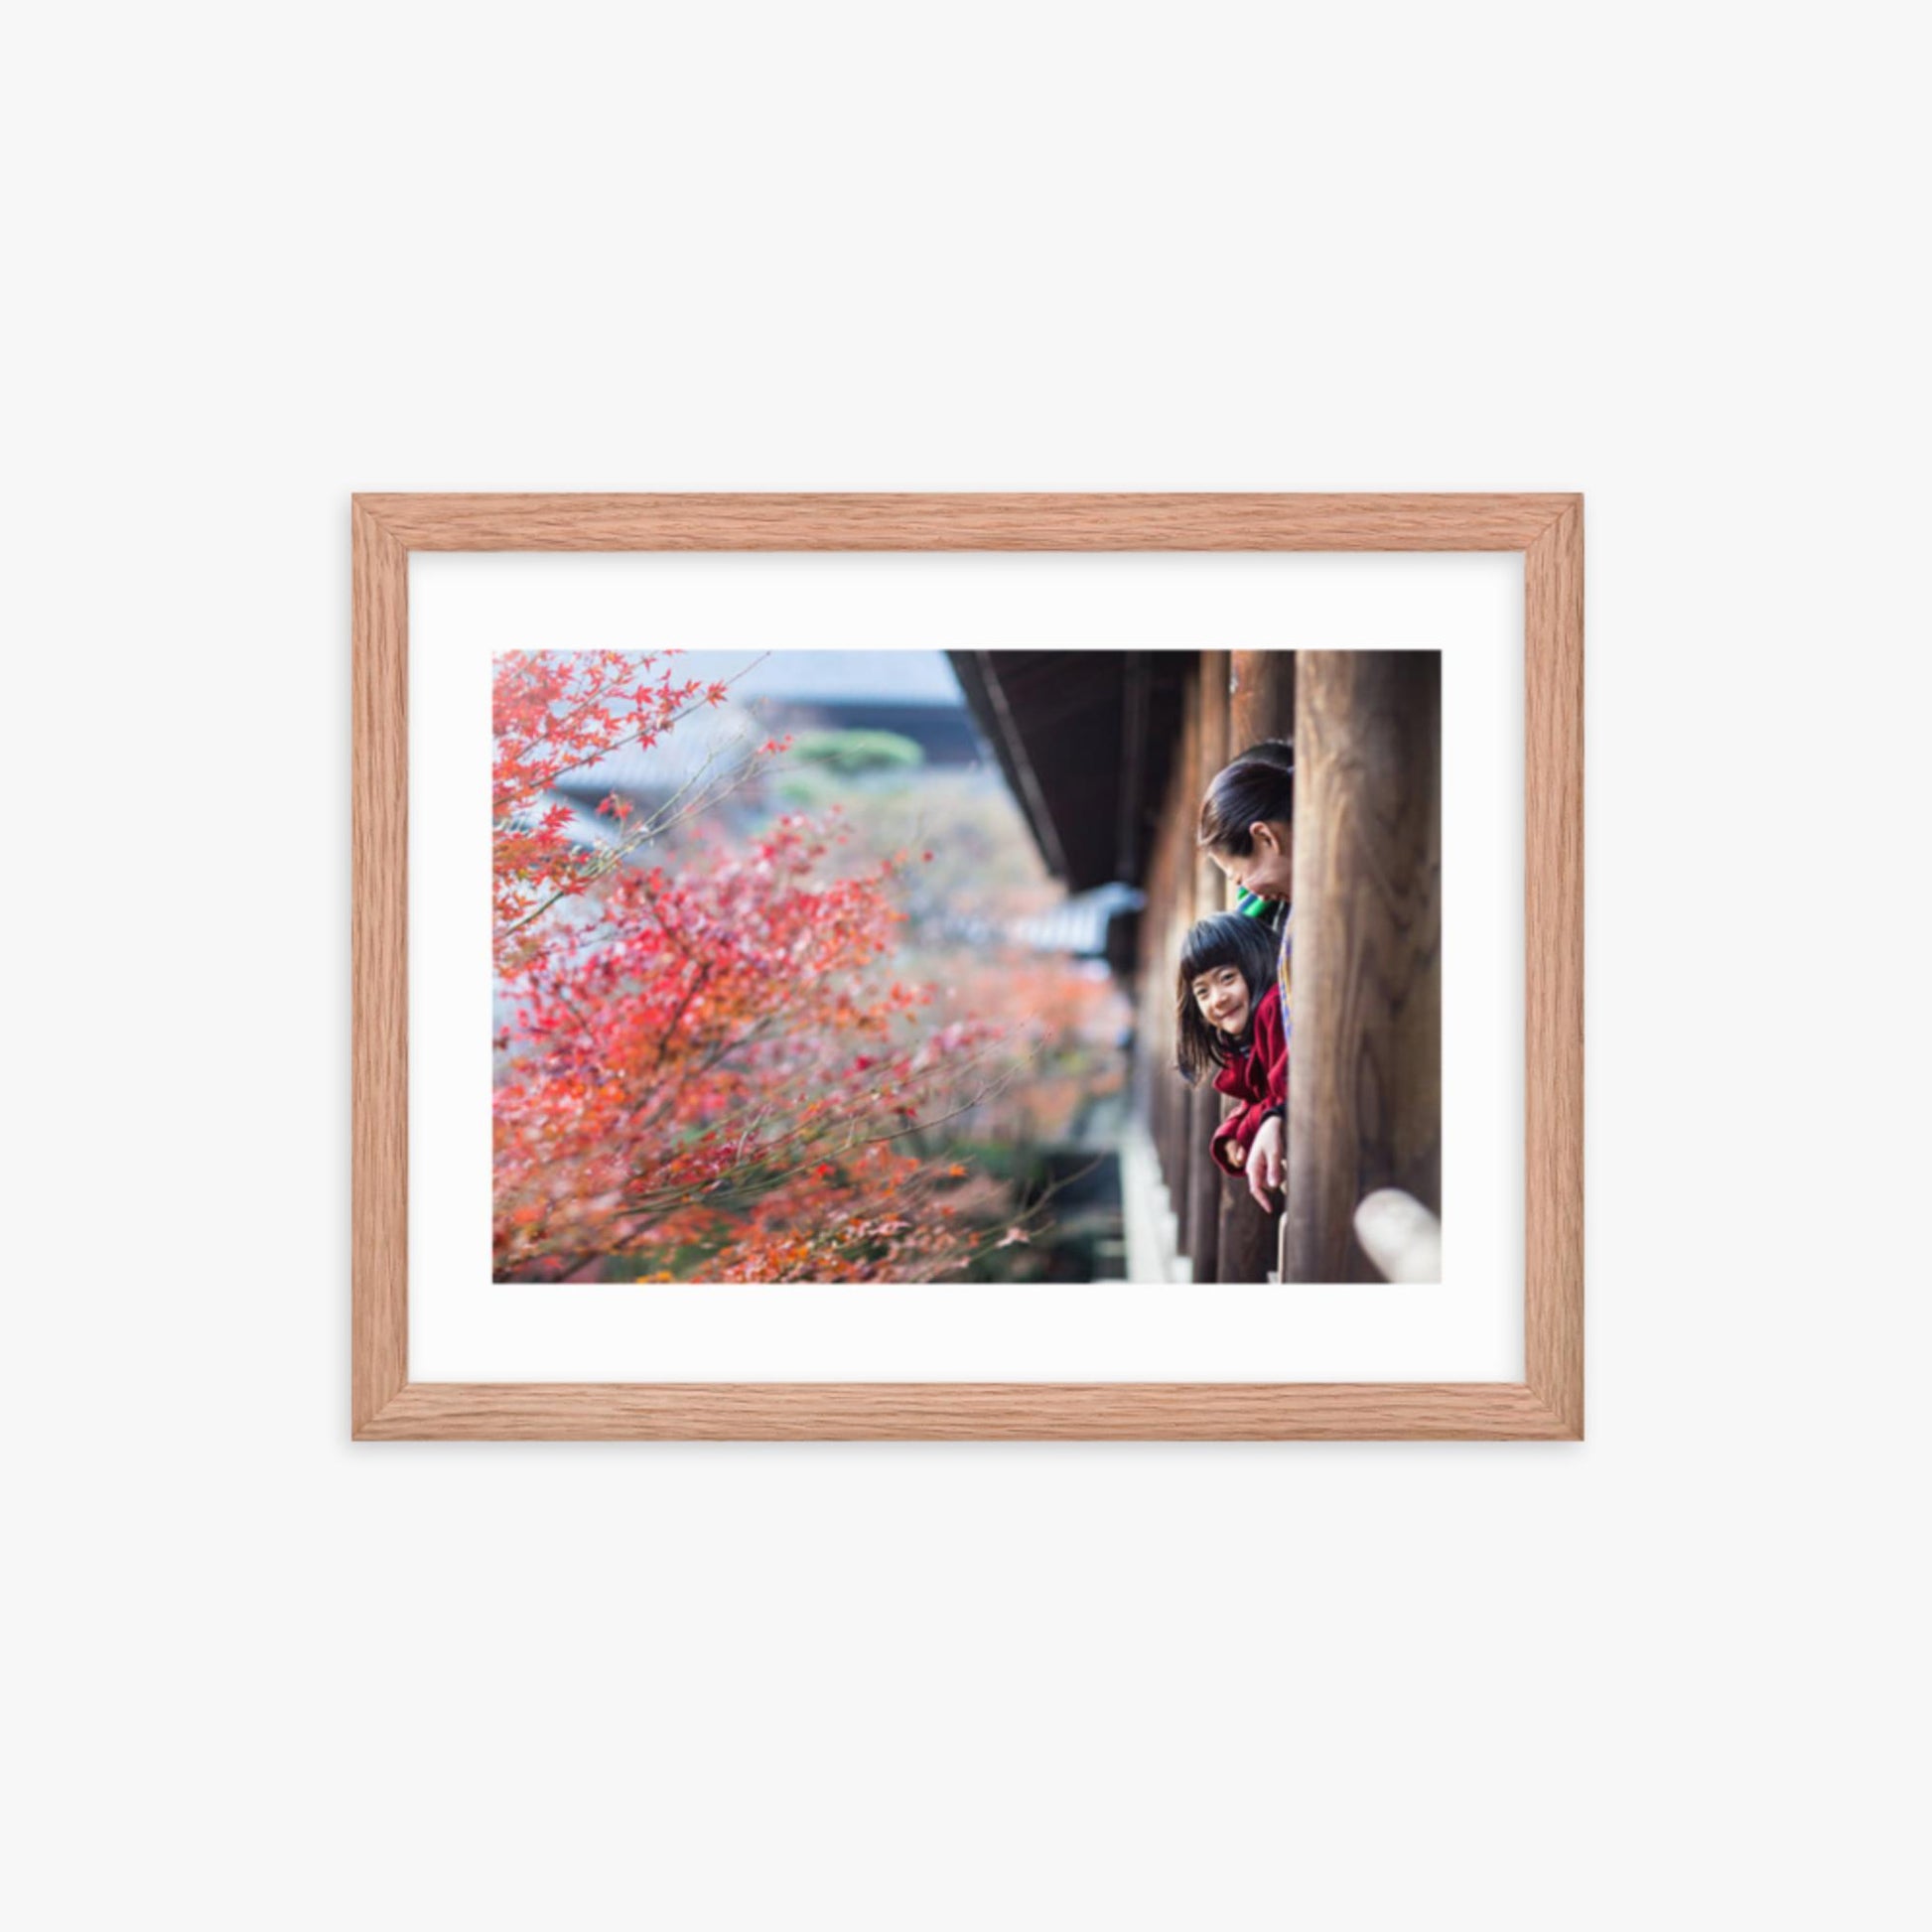 Father, mother and daughter at a temple enjoying autumn leaves 12x16 in Poster With Oak Frame